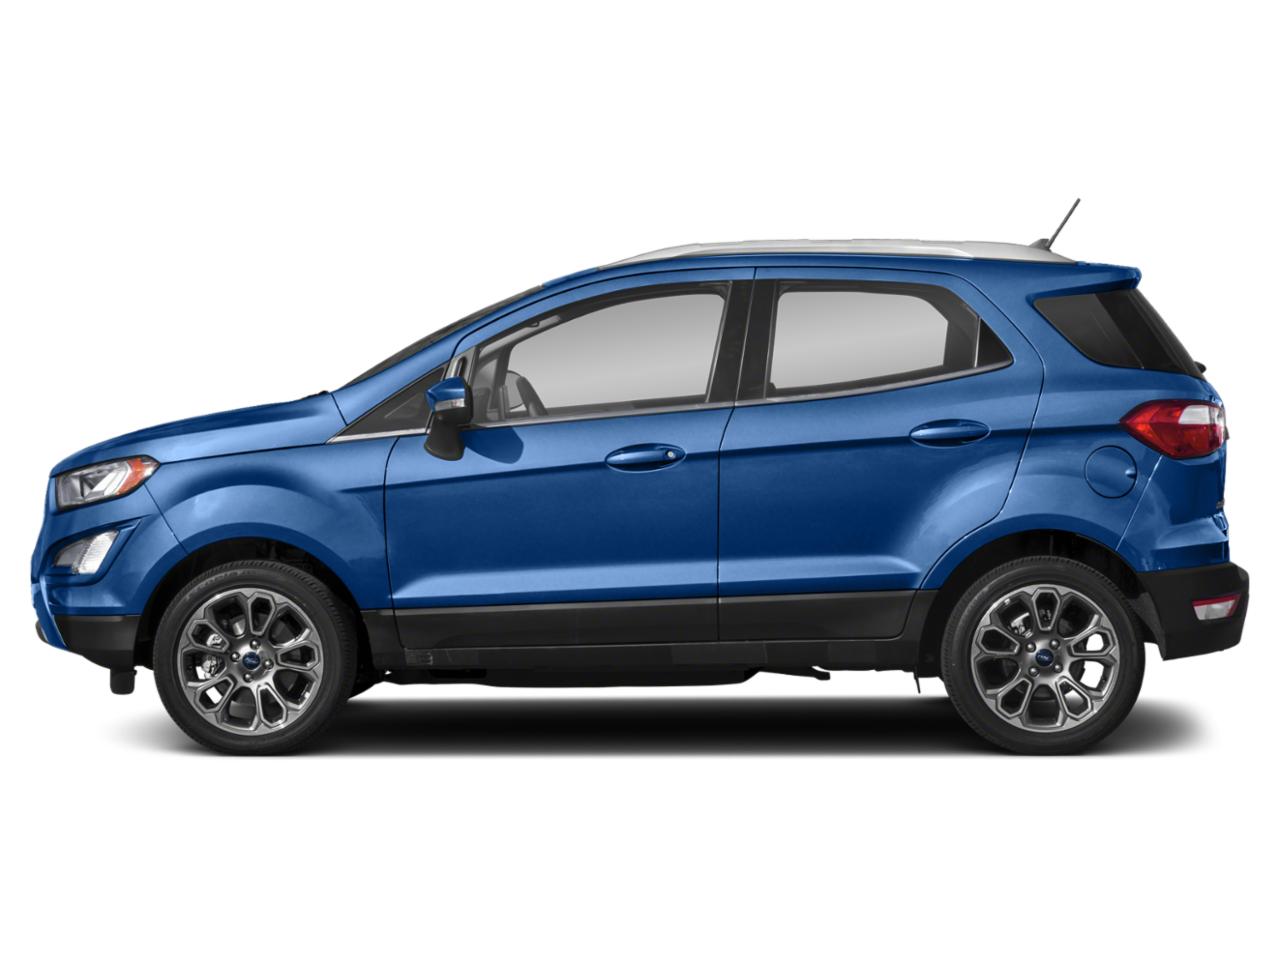 Used 2019 Ford Ecosport Titanium with VIN MAJ6S3KLXKC250673 for sale in Cherry Hill, NJ